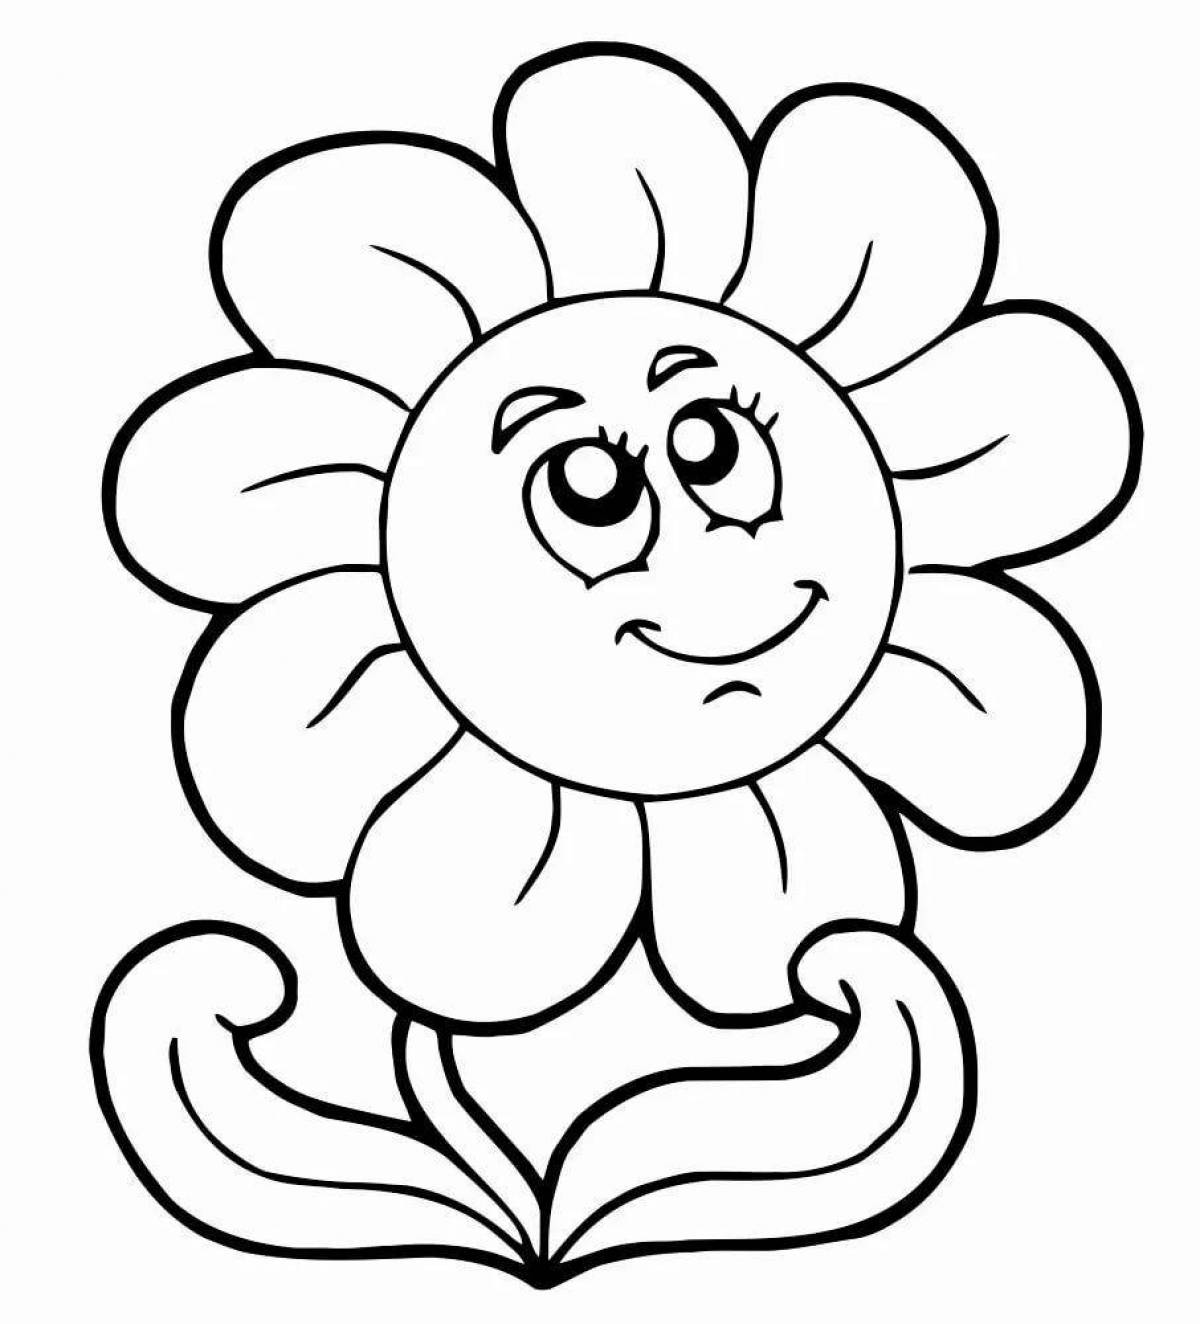 Adorable flower picture coloring book for kids